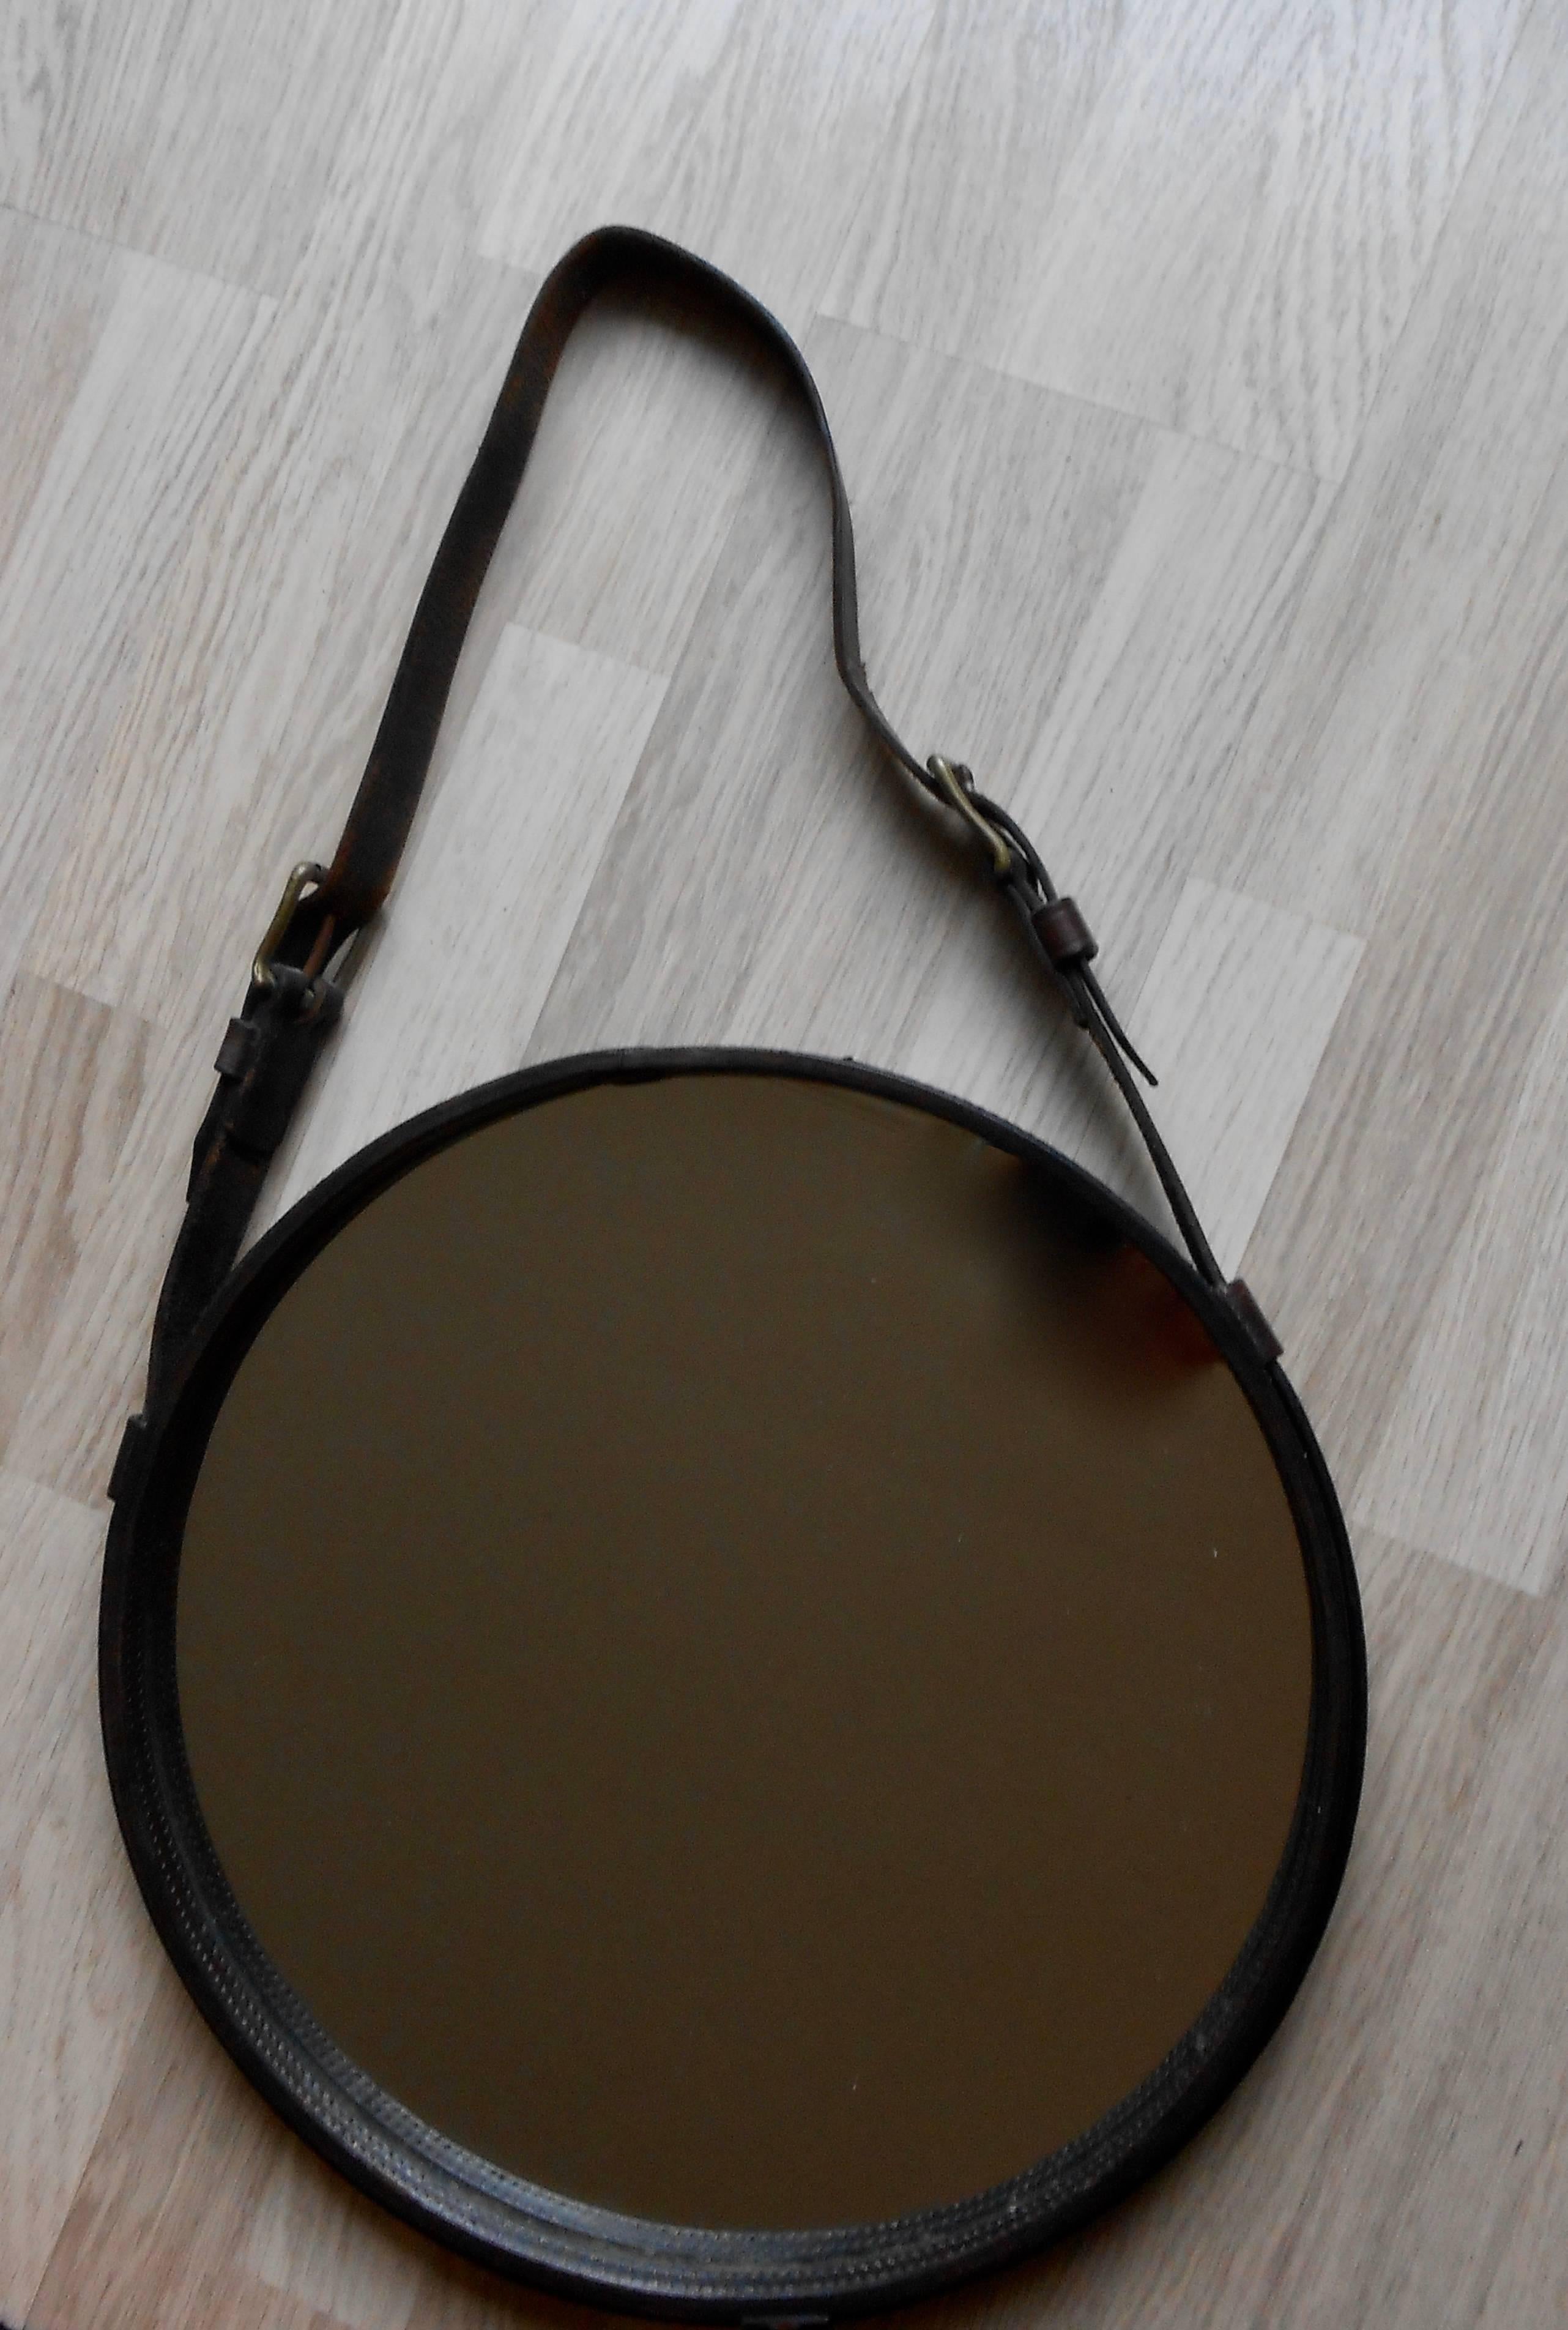 Mid-Century Modern Black Leather Mirror by Jacques Adnet, France, 1950 For Sale